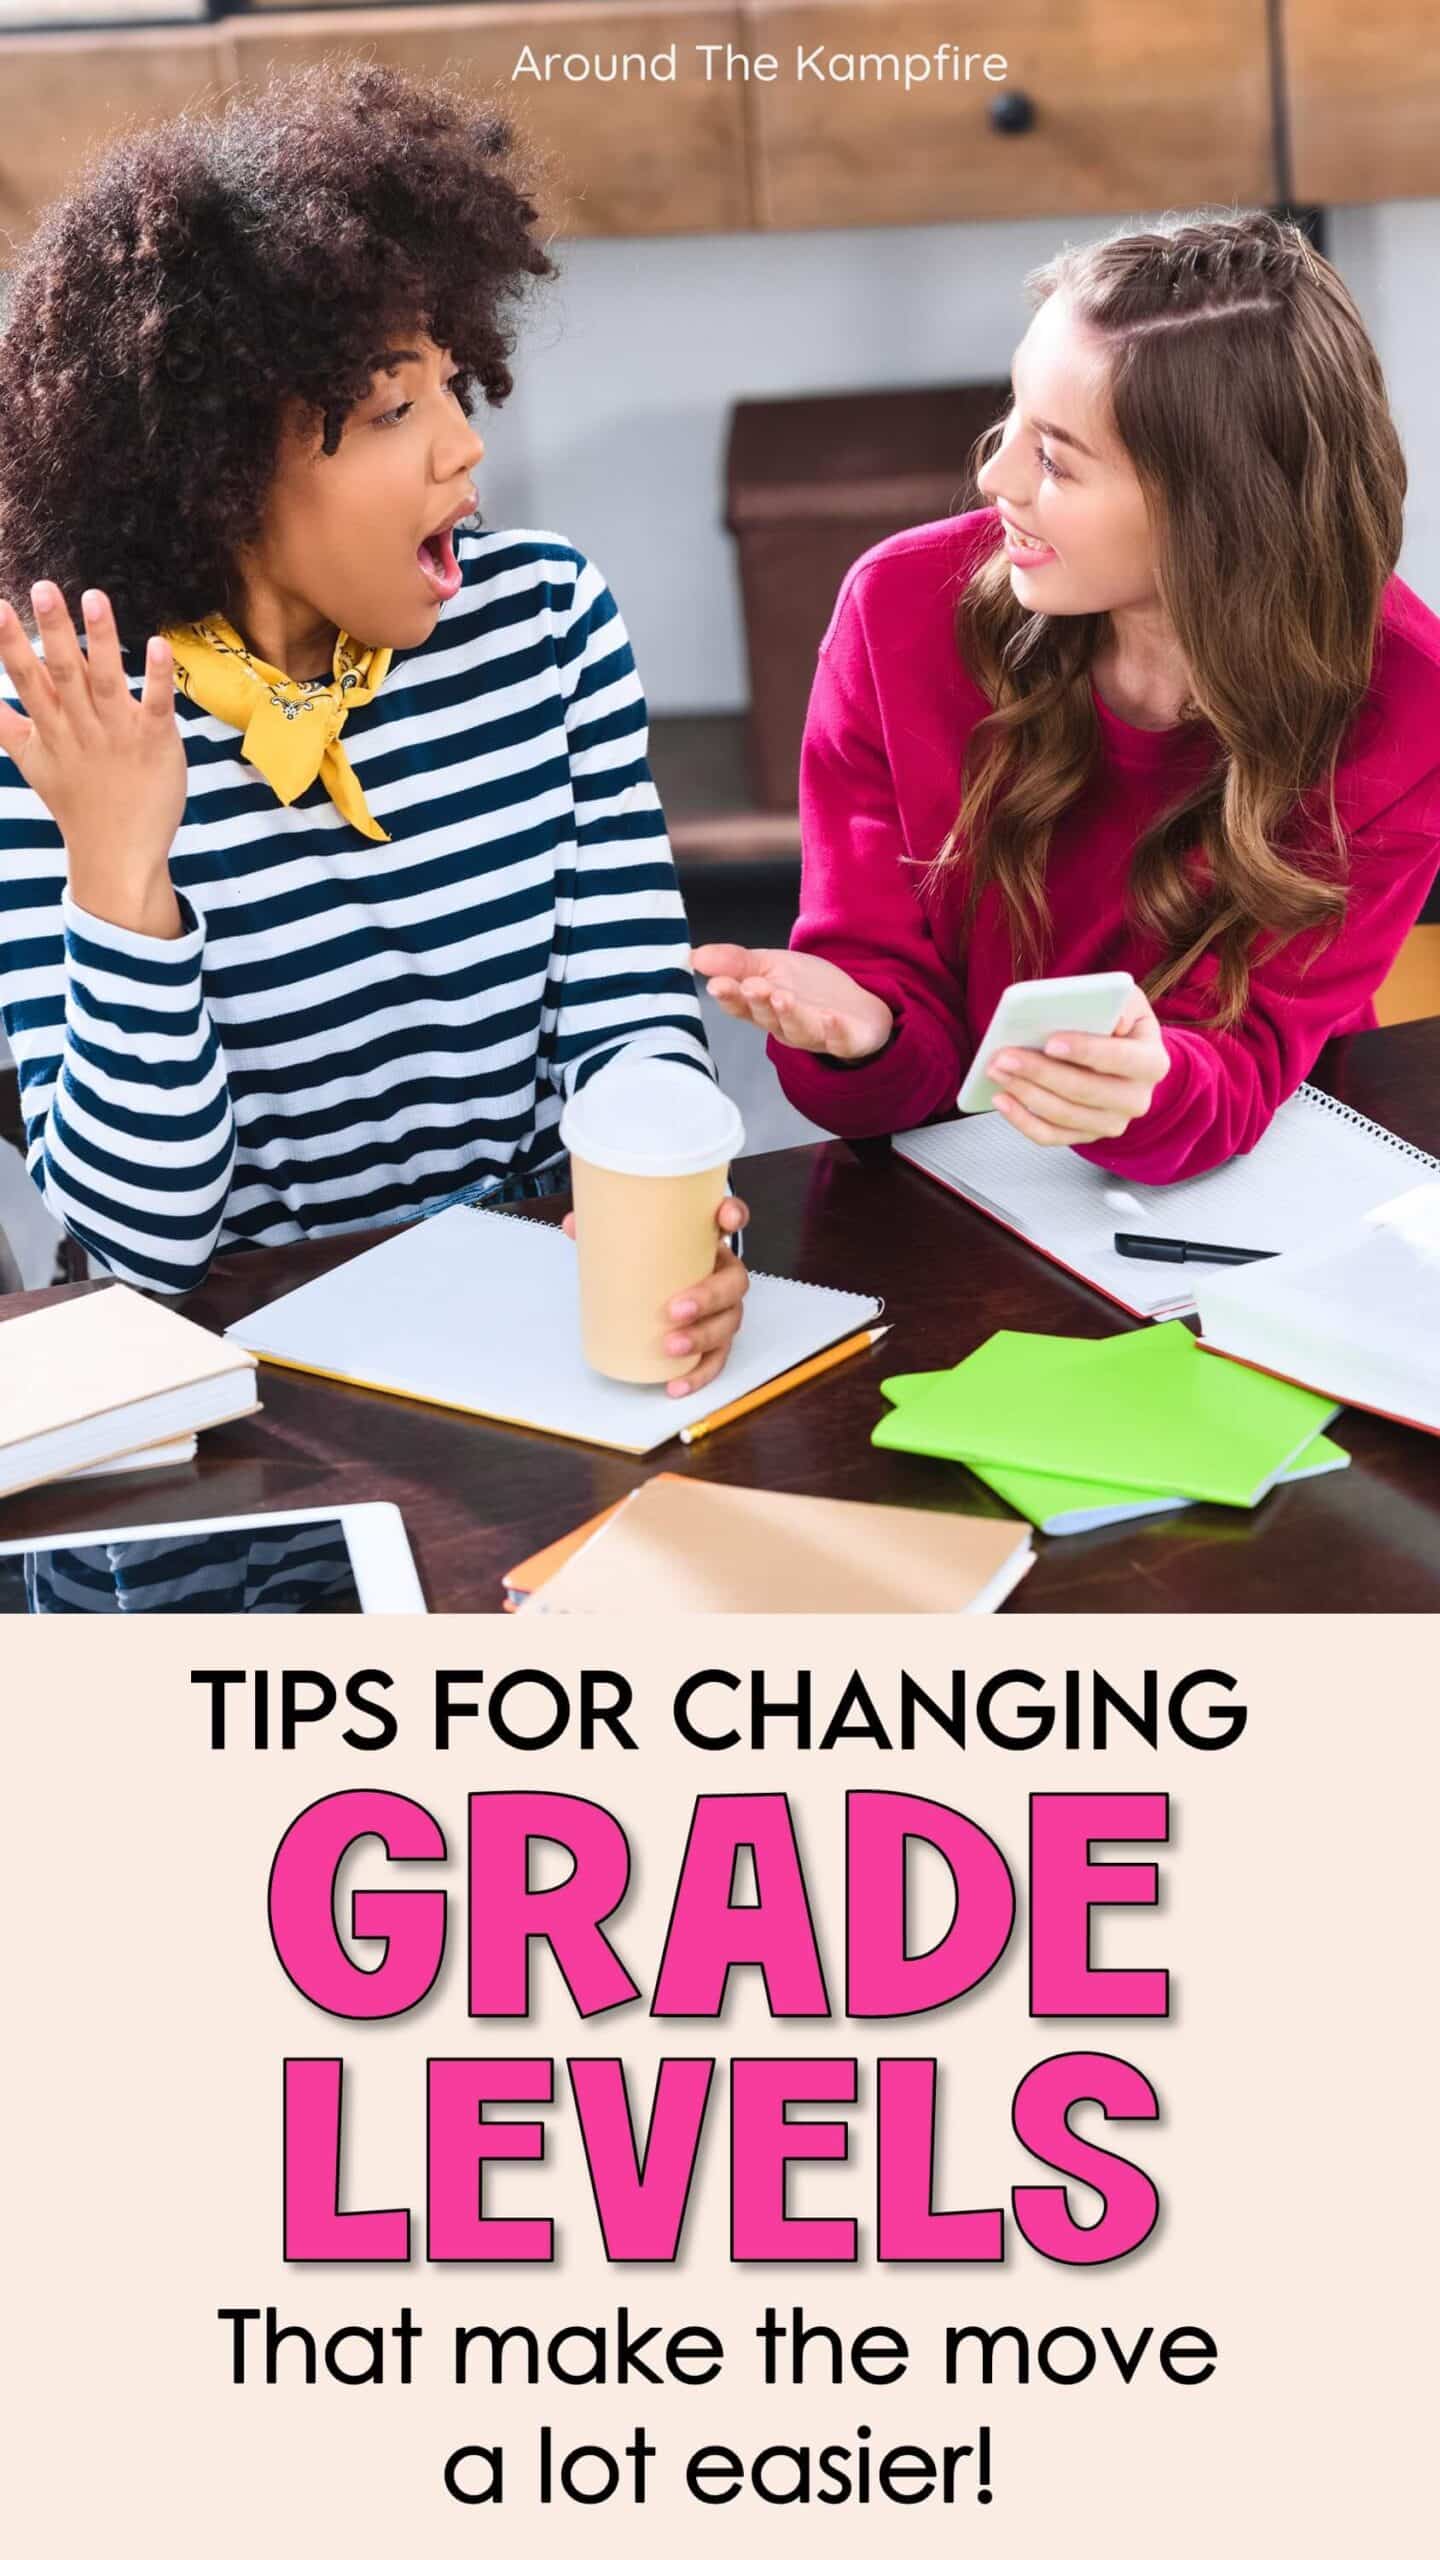 Tips for changing grade levels